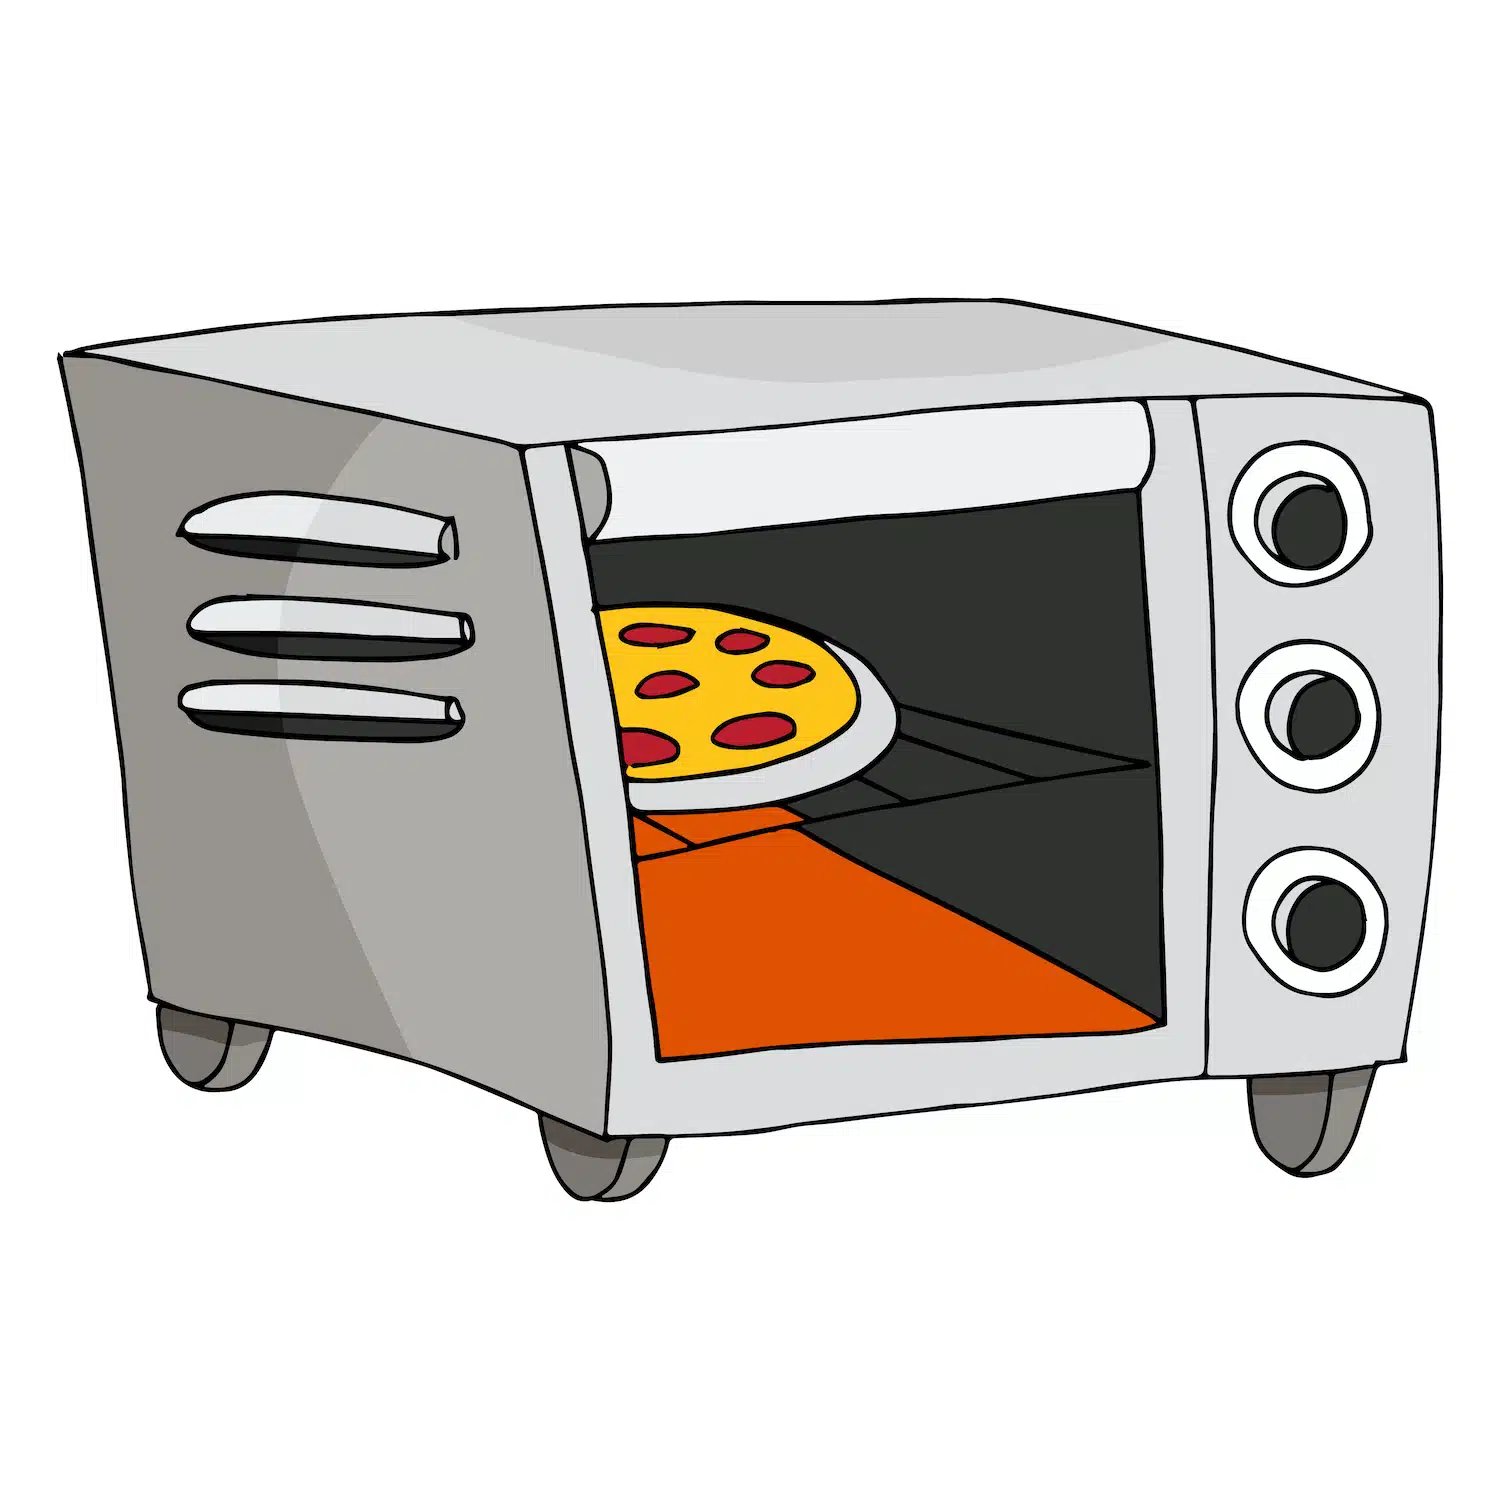 How to Light an RV Oven 